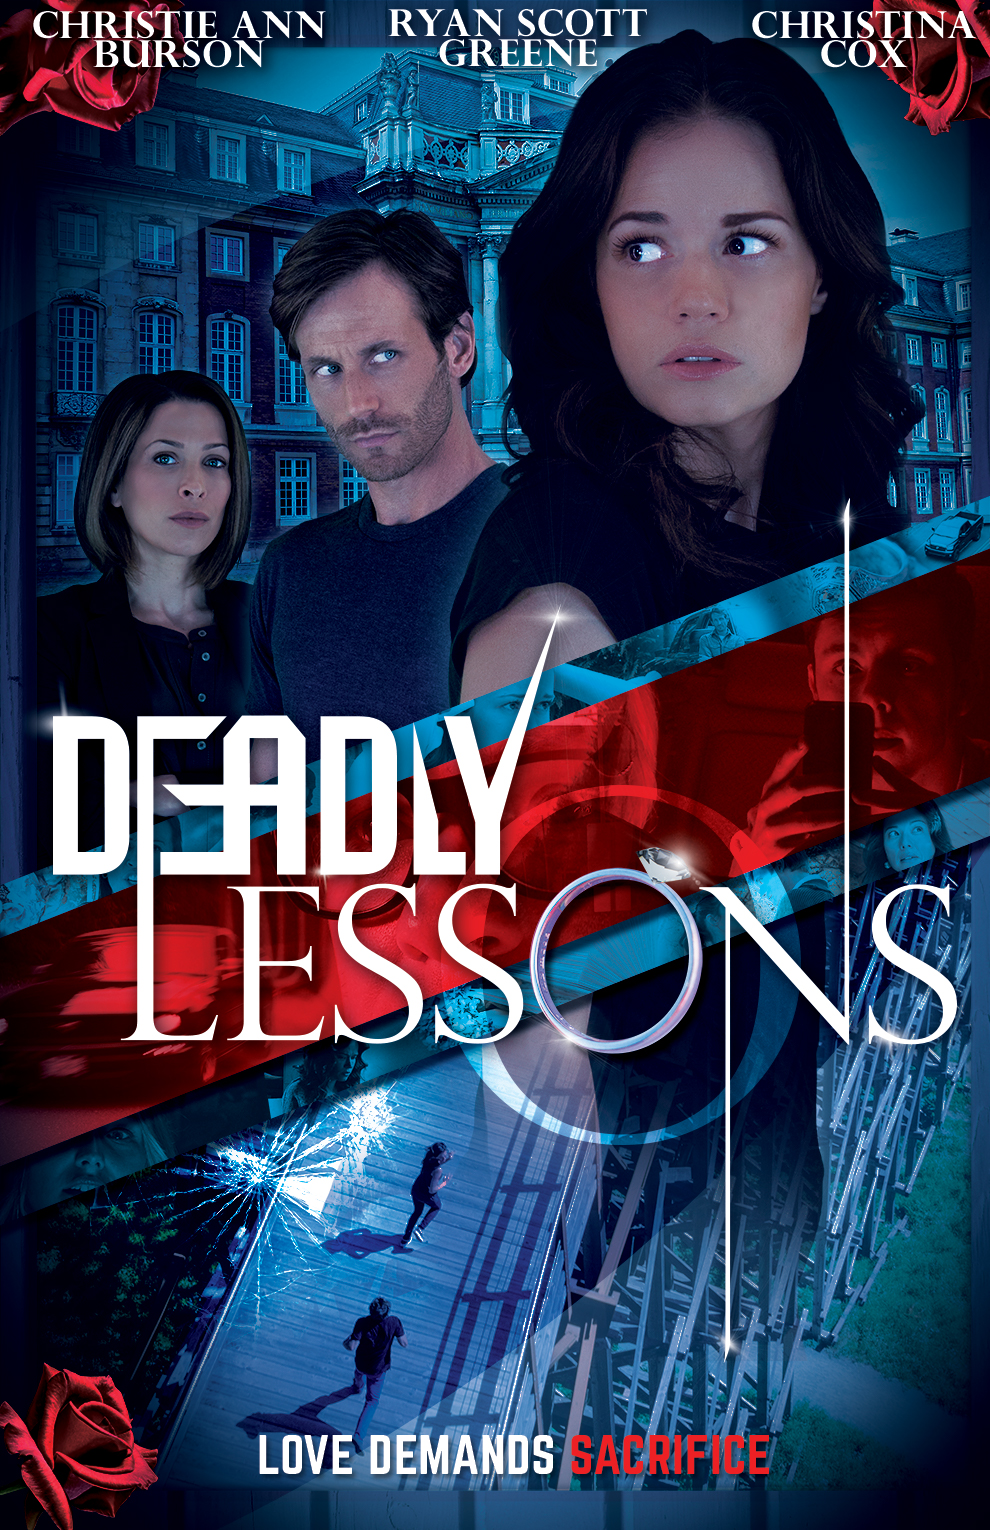 Deadly Lessons (2017) Screenshot 3 